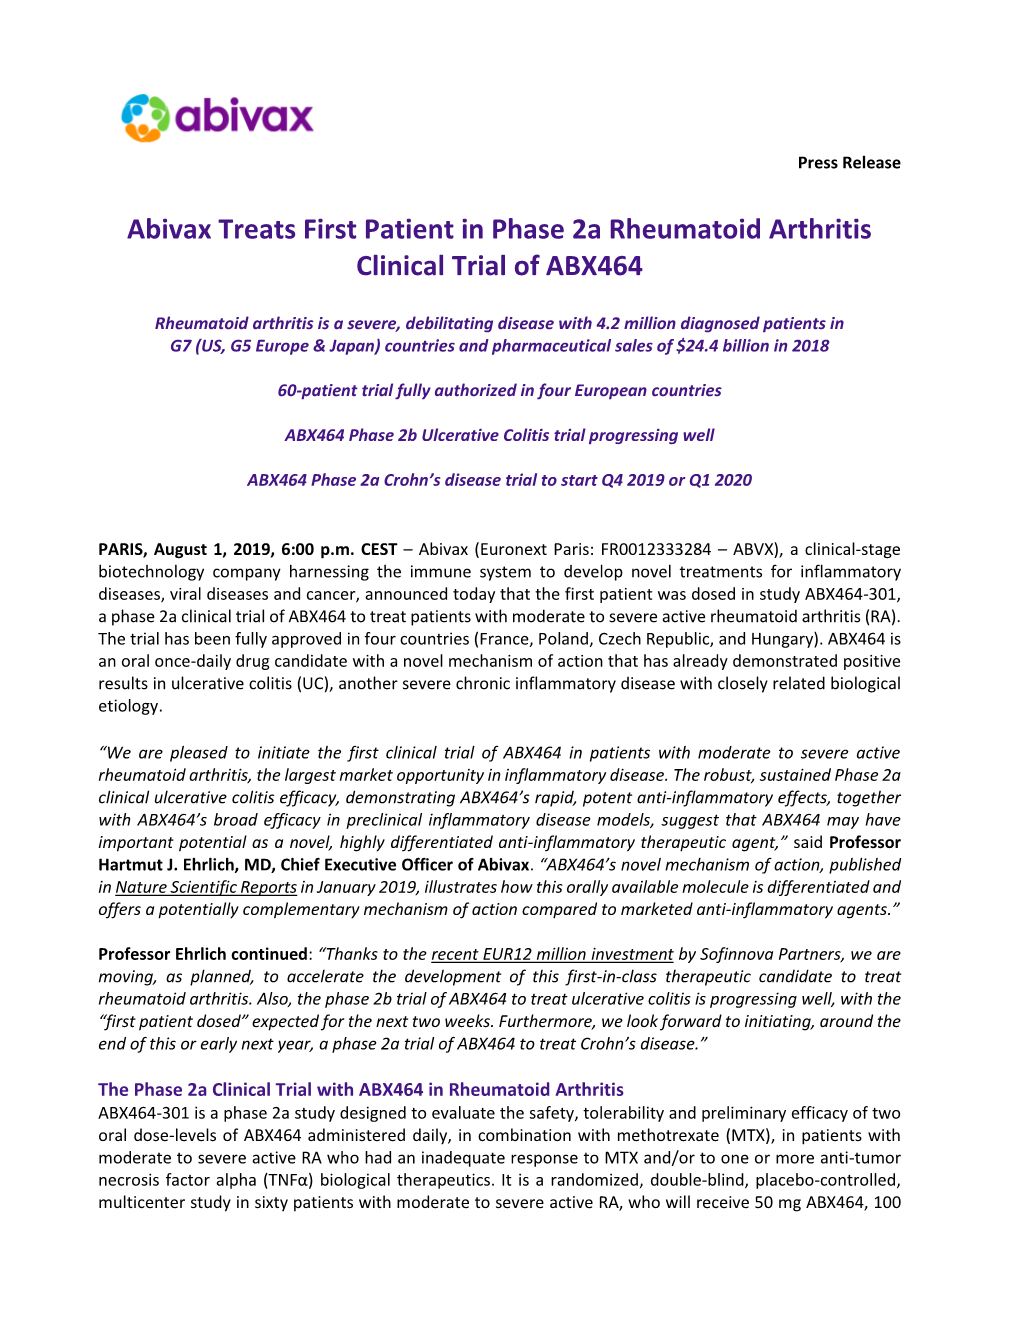 Abivax Treats First Patient in Phase 2A Rheumatoid Arthritis Clinical Trial of ABX464